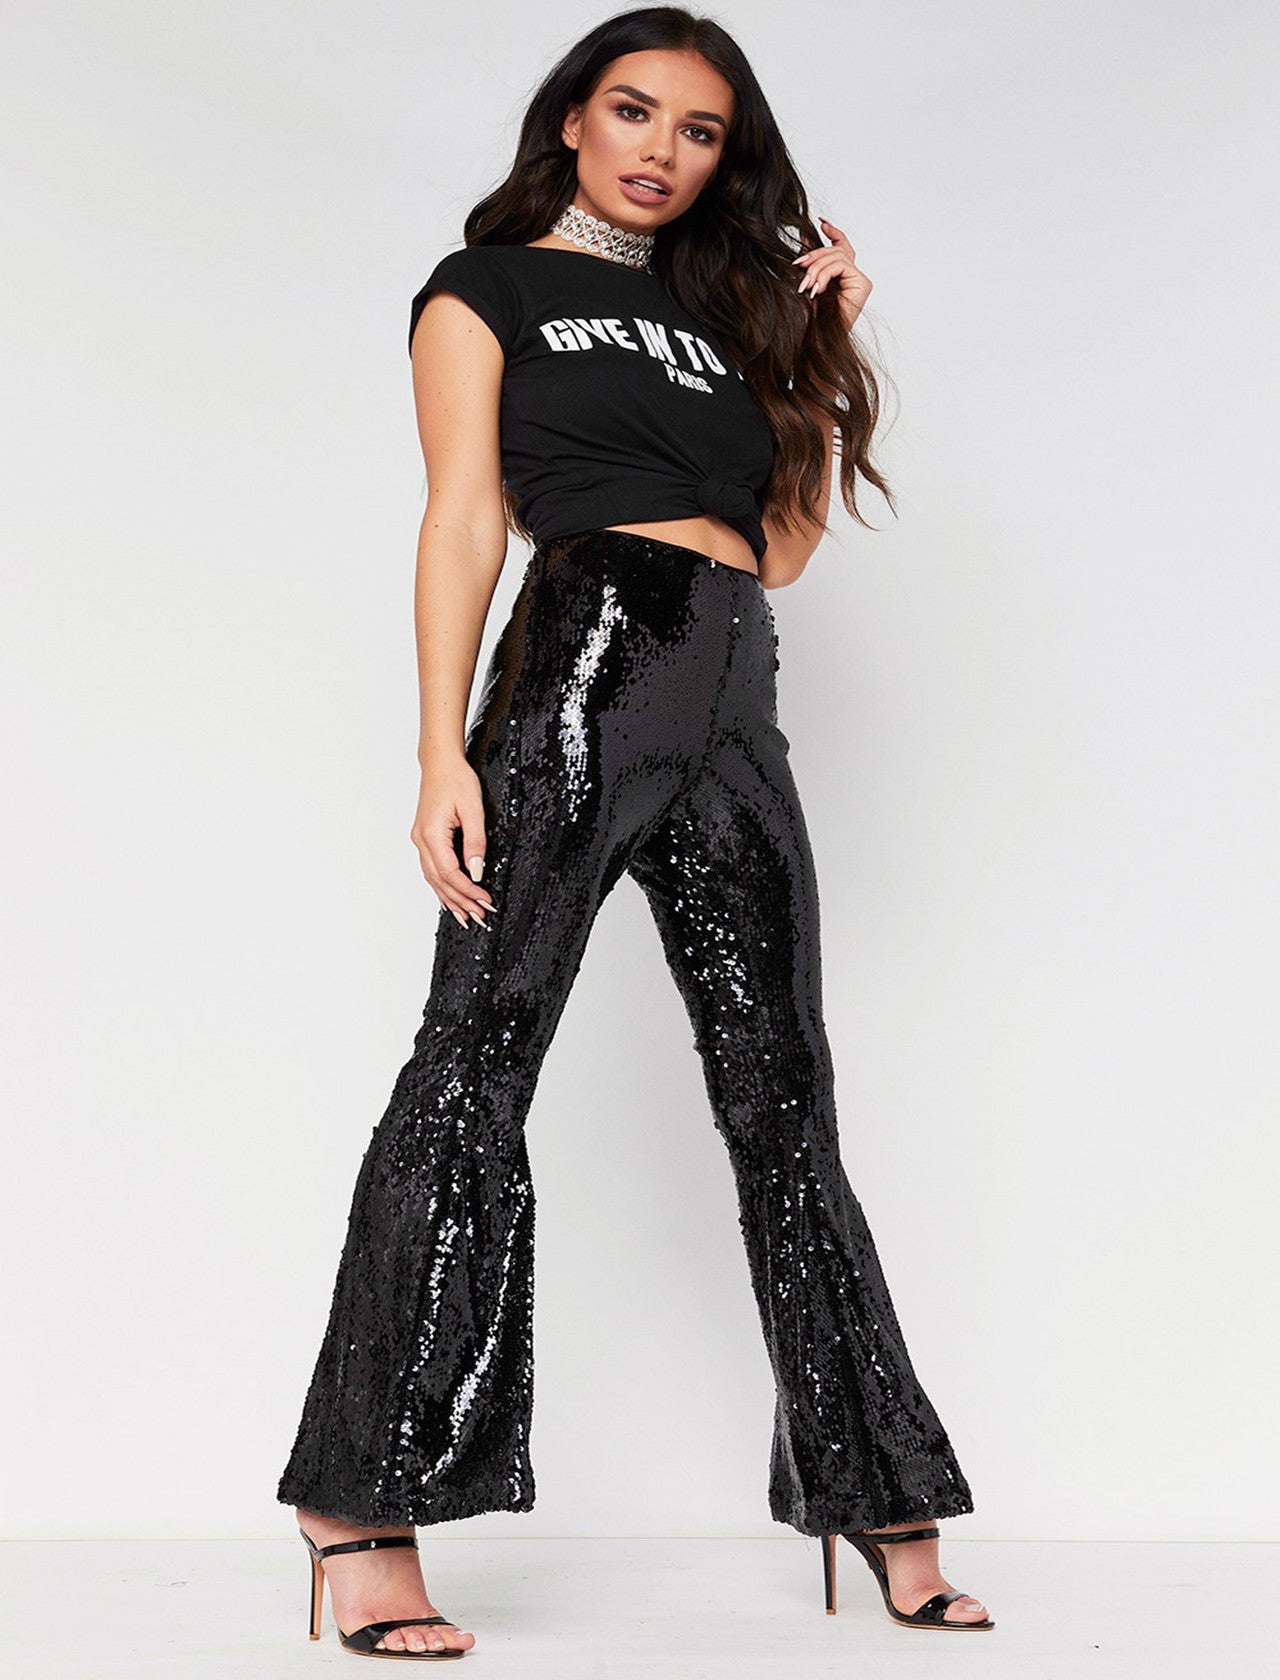 Shinning Sequins High Waist Solid Color Long Bell-bottomed Pants